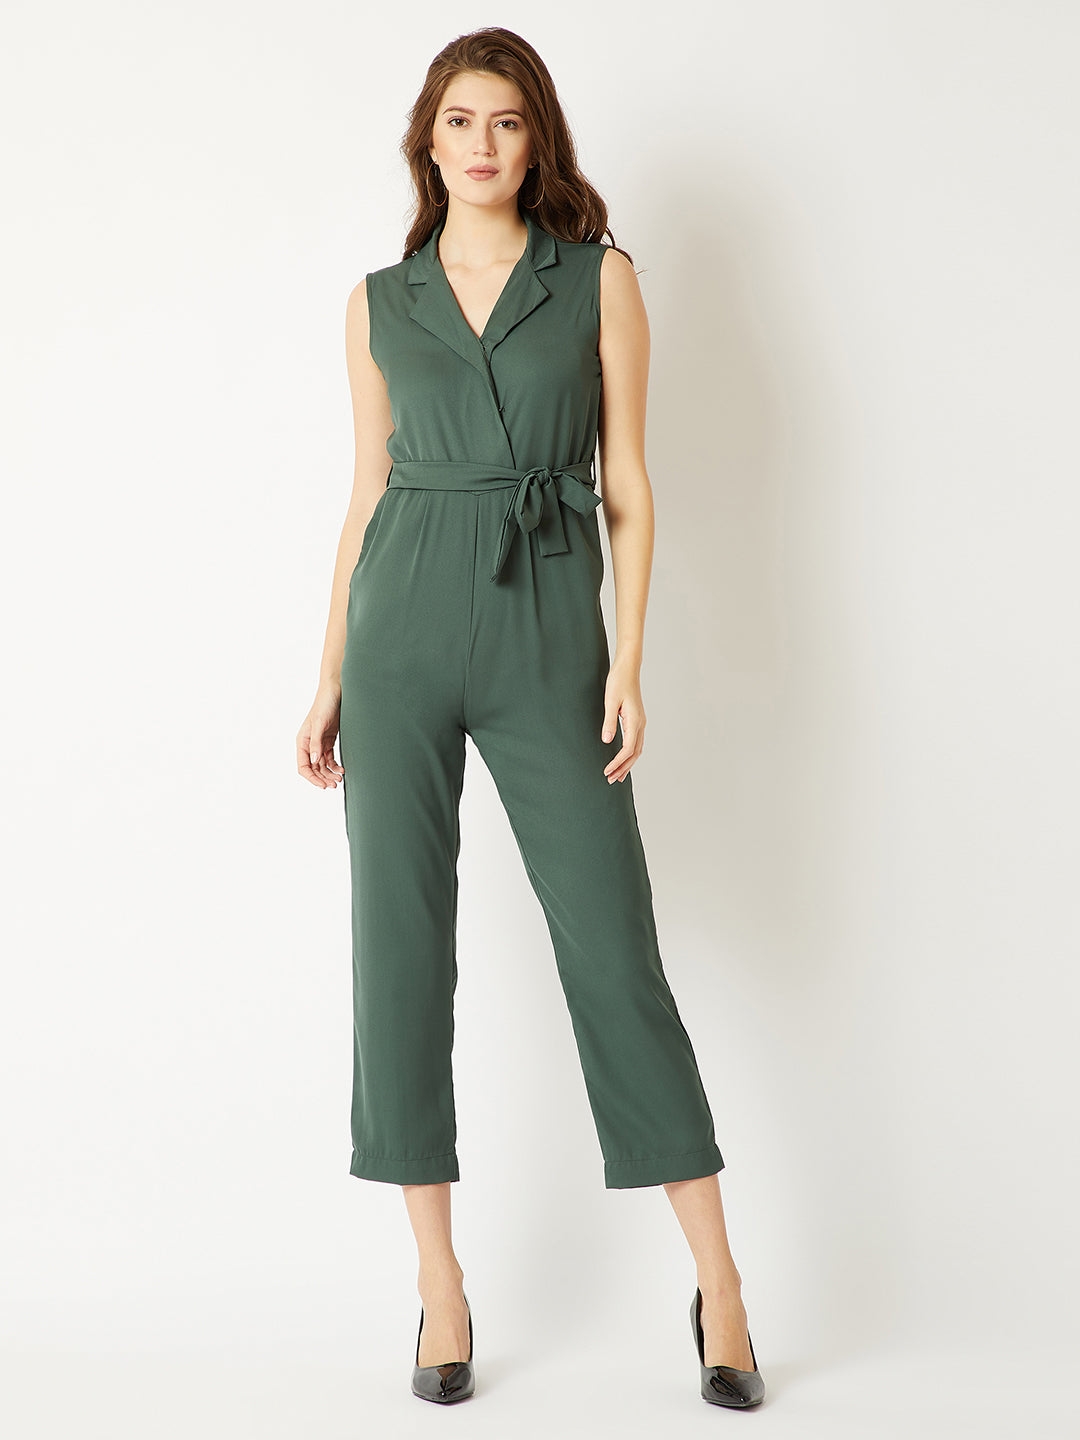 MISS CHASE | Dark Green V-Neck Sleeveless Straight Leg Tie-Up Solid Belted Wrap Jumpsuit